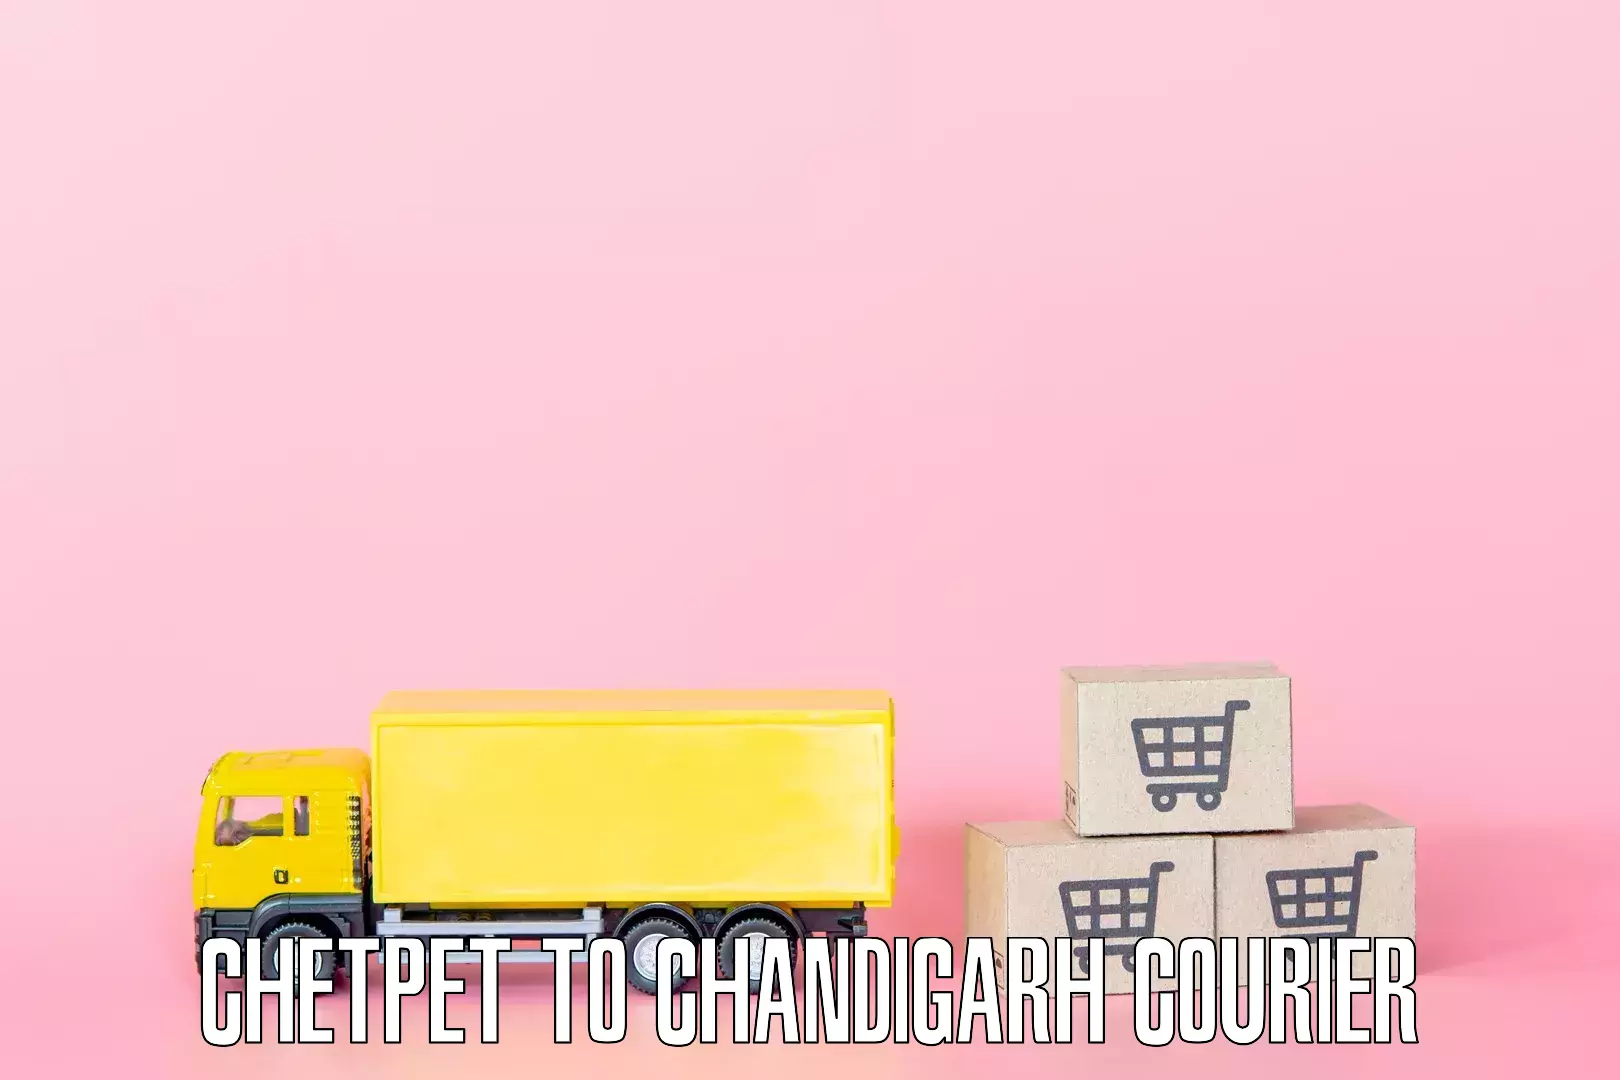 Professional movers Chetpet to Chandigarh